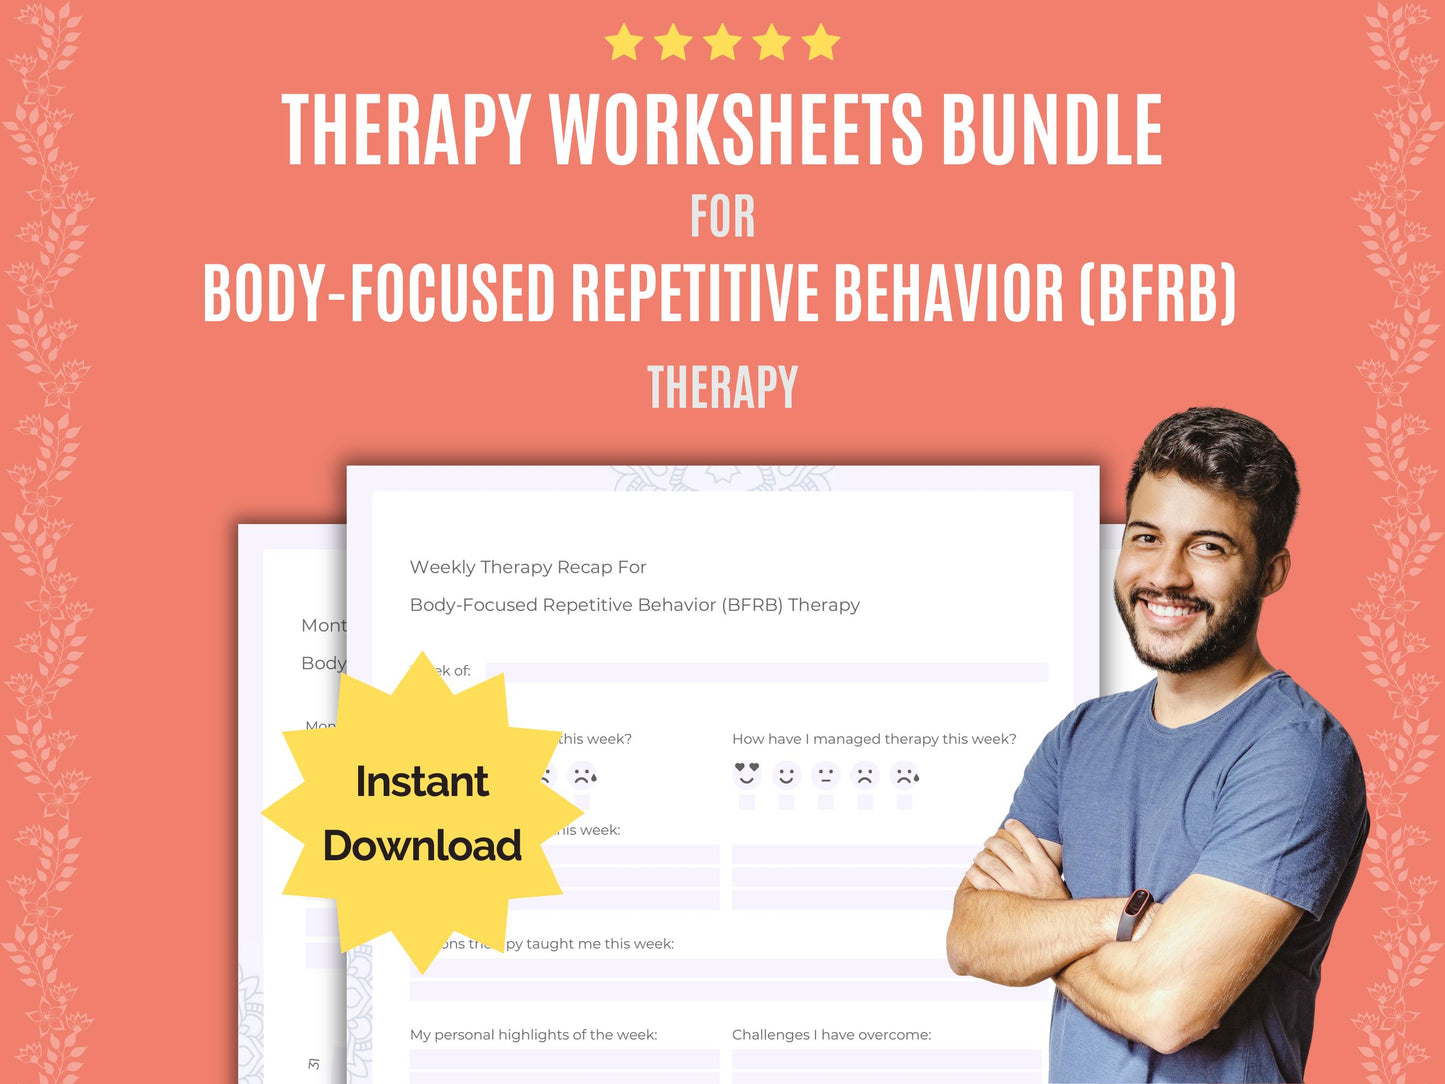 BFRB Goal Setting, BFRB Cheat Sheet, BFRB Workbooks, BFRB Therapy, Body-Focused, BFRB Planners, BFRB Tools, BFRB Resources, BFRB Counseling, BFRB Templates, BFRB Journaling, BFRB Journals, Behavior, BFRB Notes, Repetitive